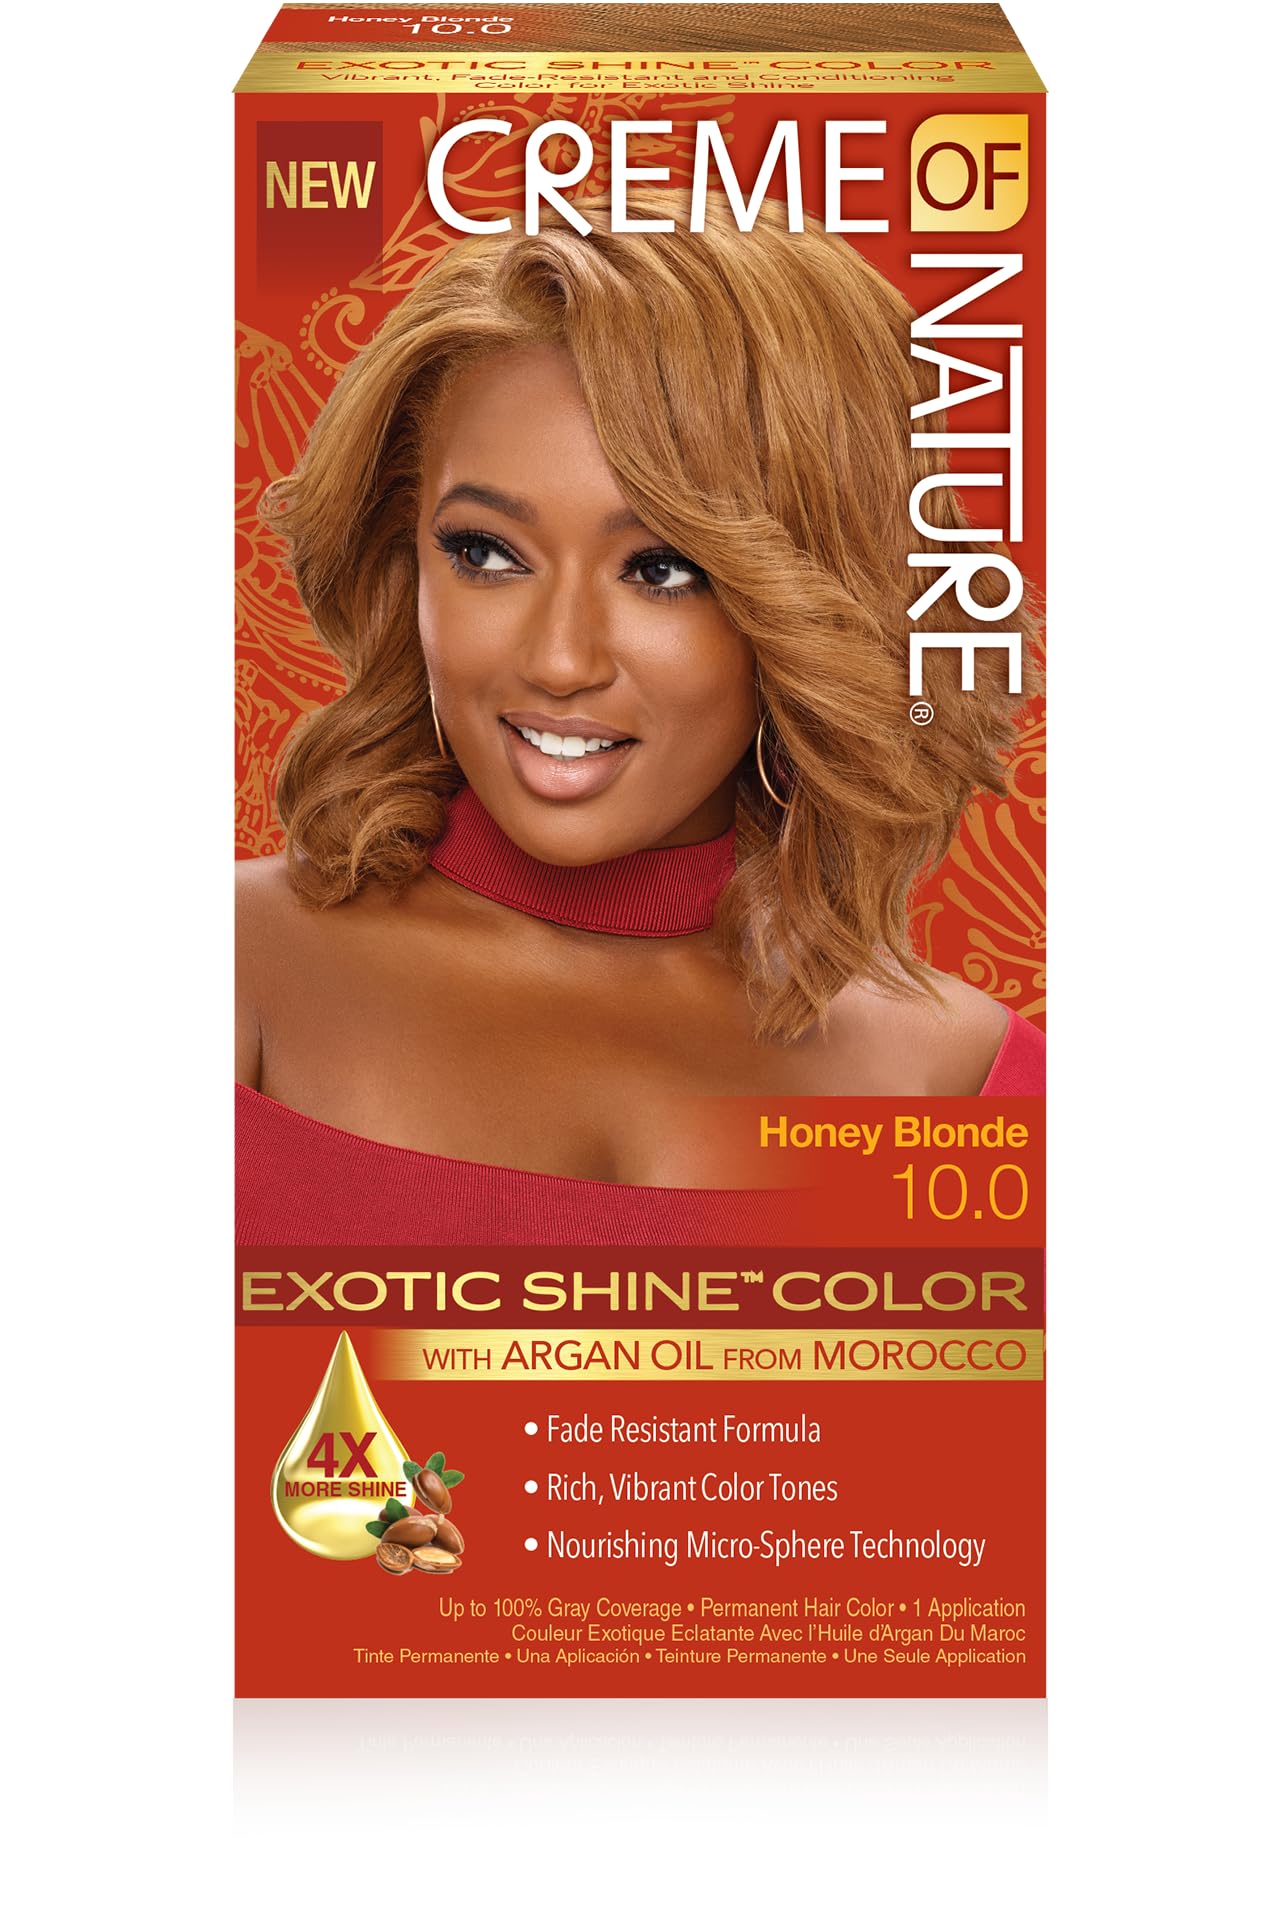 Creme of Nature Exotic Shine Hair Color With Argan Oil from Morocco, 10.0 Honey Blonde, 1 Application